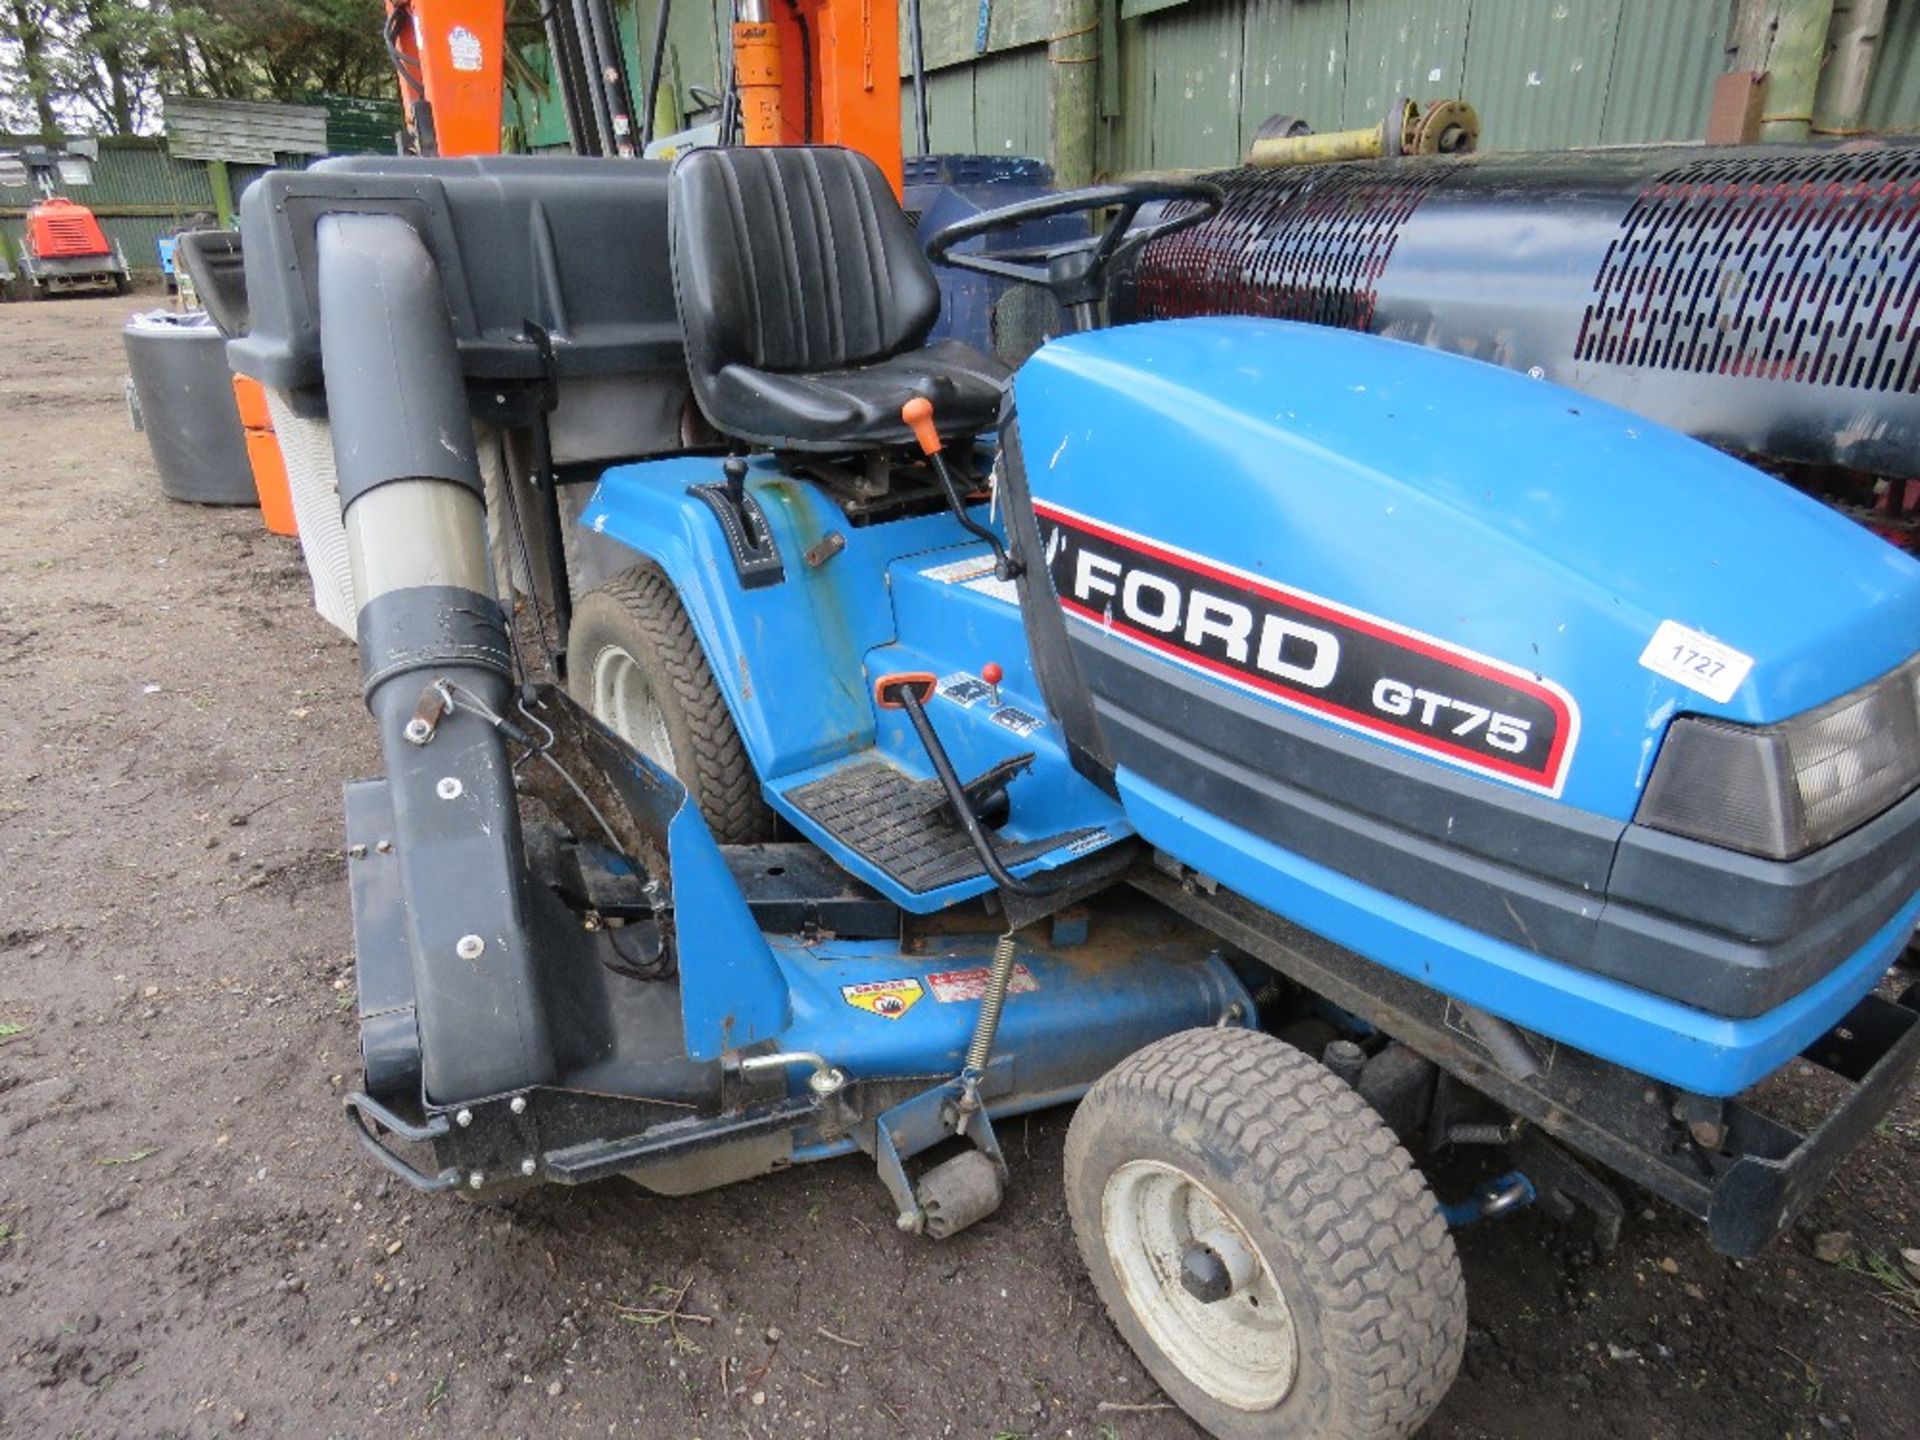 Ford GT72 2wd diesel ride on mower c/w collector